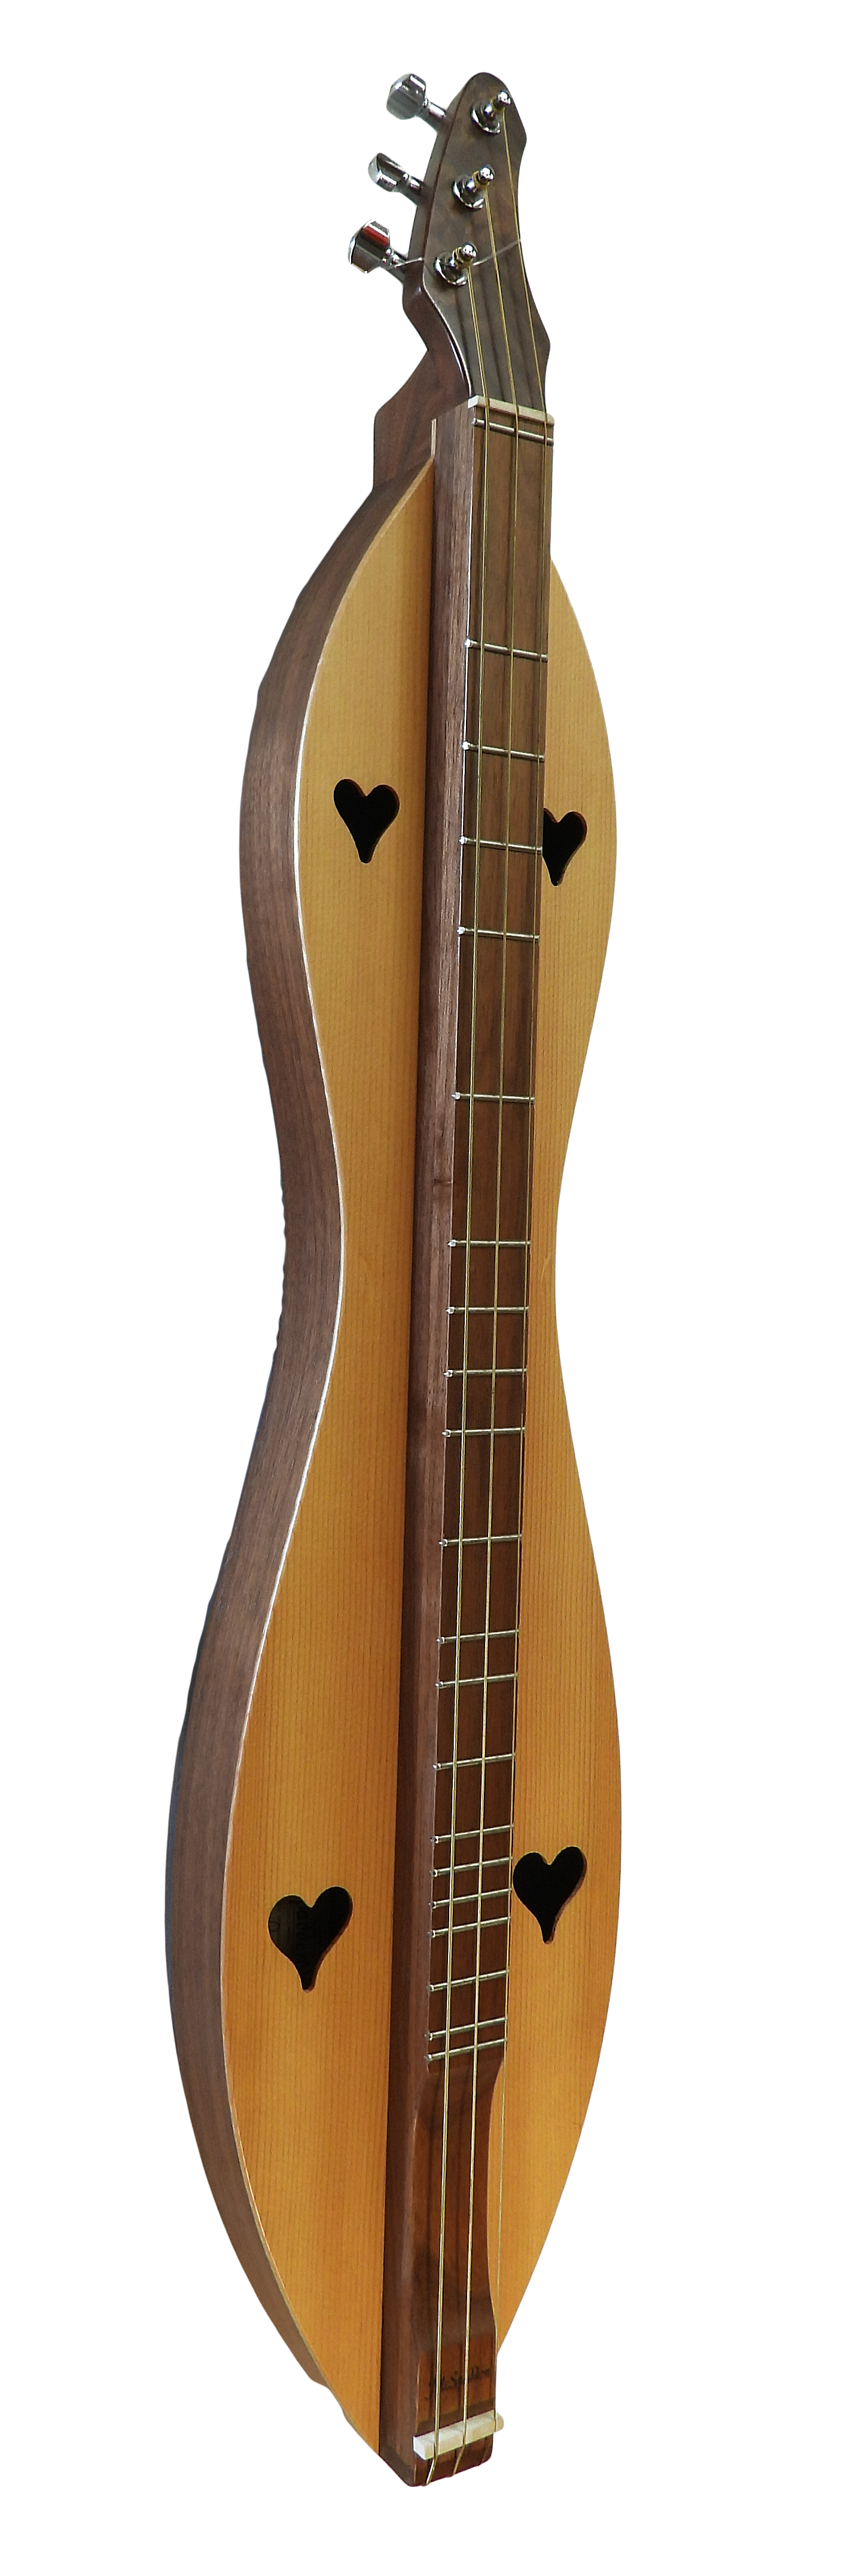 A 3 String Bass, Flathead, Hourglass with Walnut back and sides, Spruce top, featuring a padded Navy nylon case.